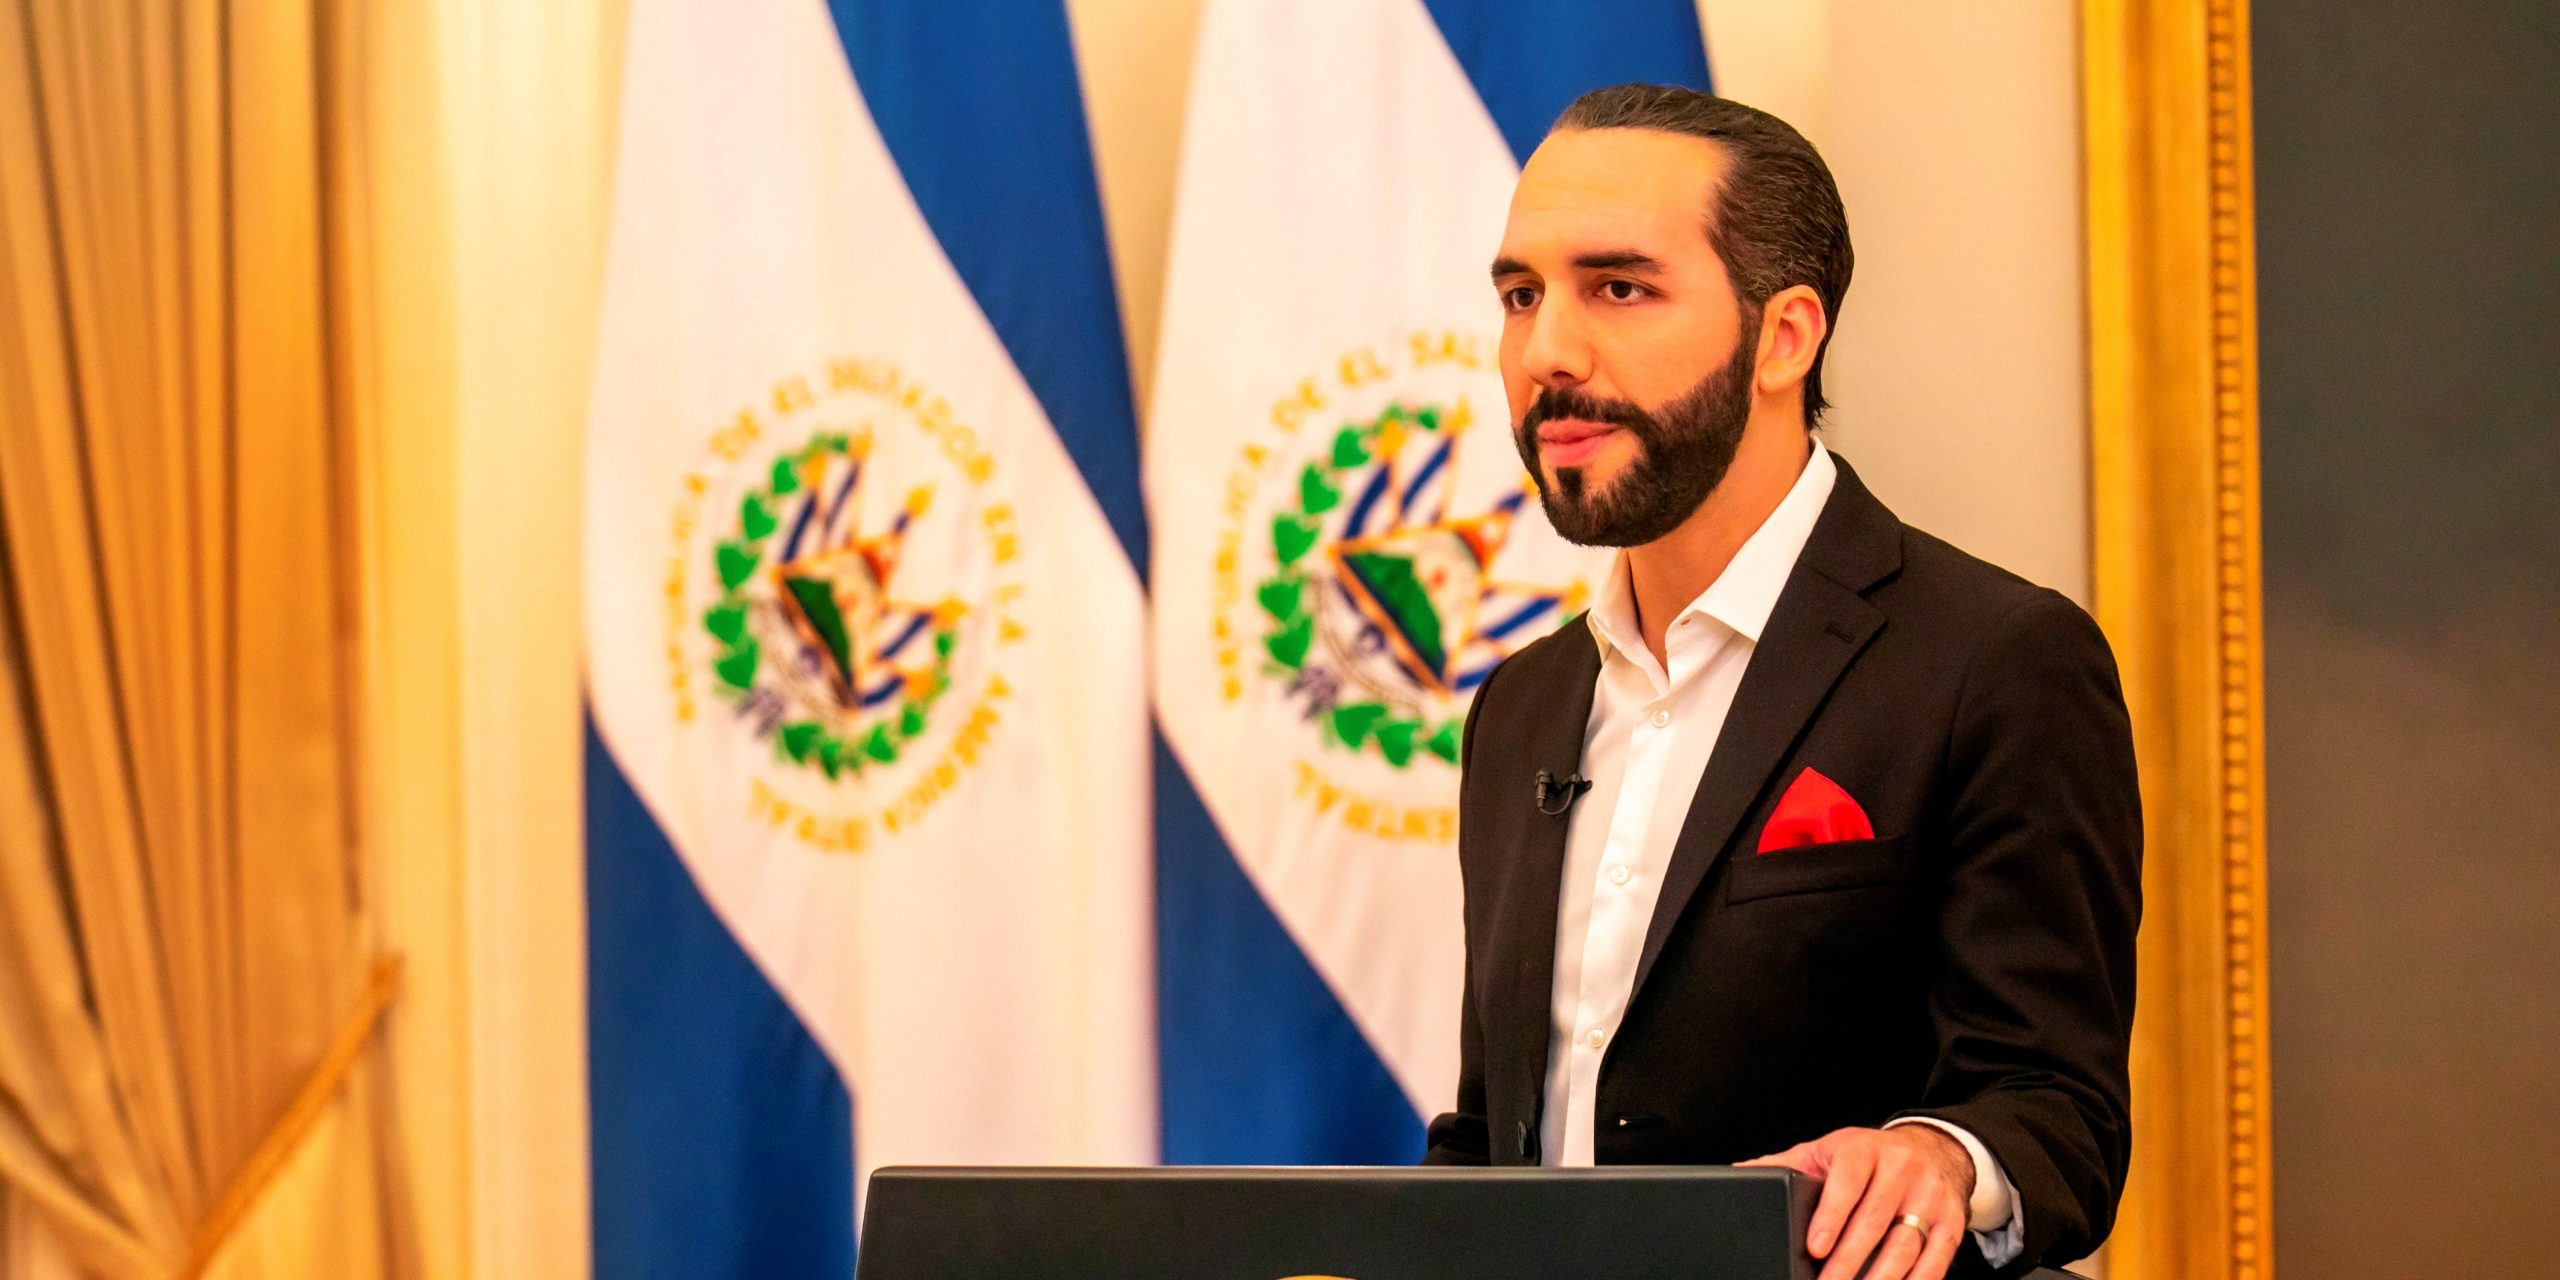 El Salvador's President Nayib Bukele addresses the nation during a live broadcast to speak about his bitcoin legal tender plan, at the Presidential House in San Salvador, El Salvador June 24, 2021.